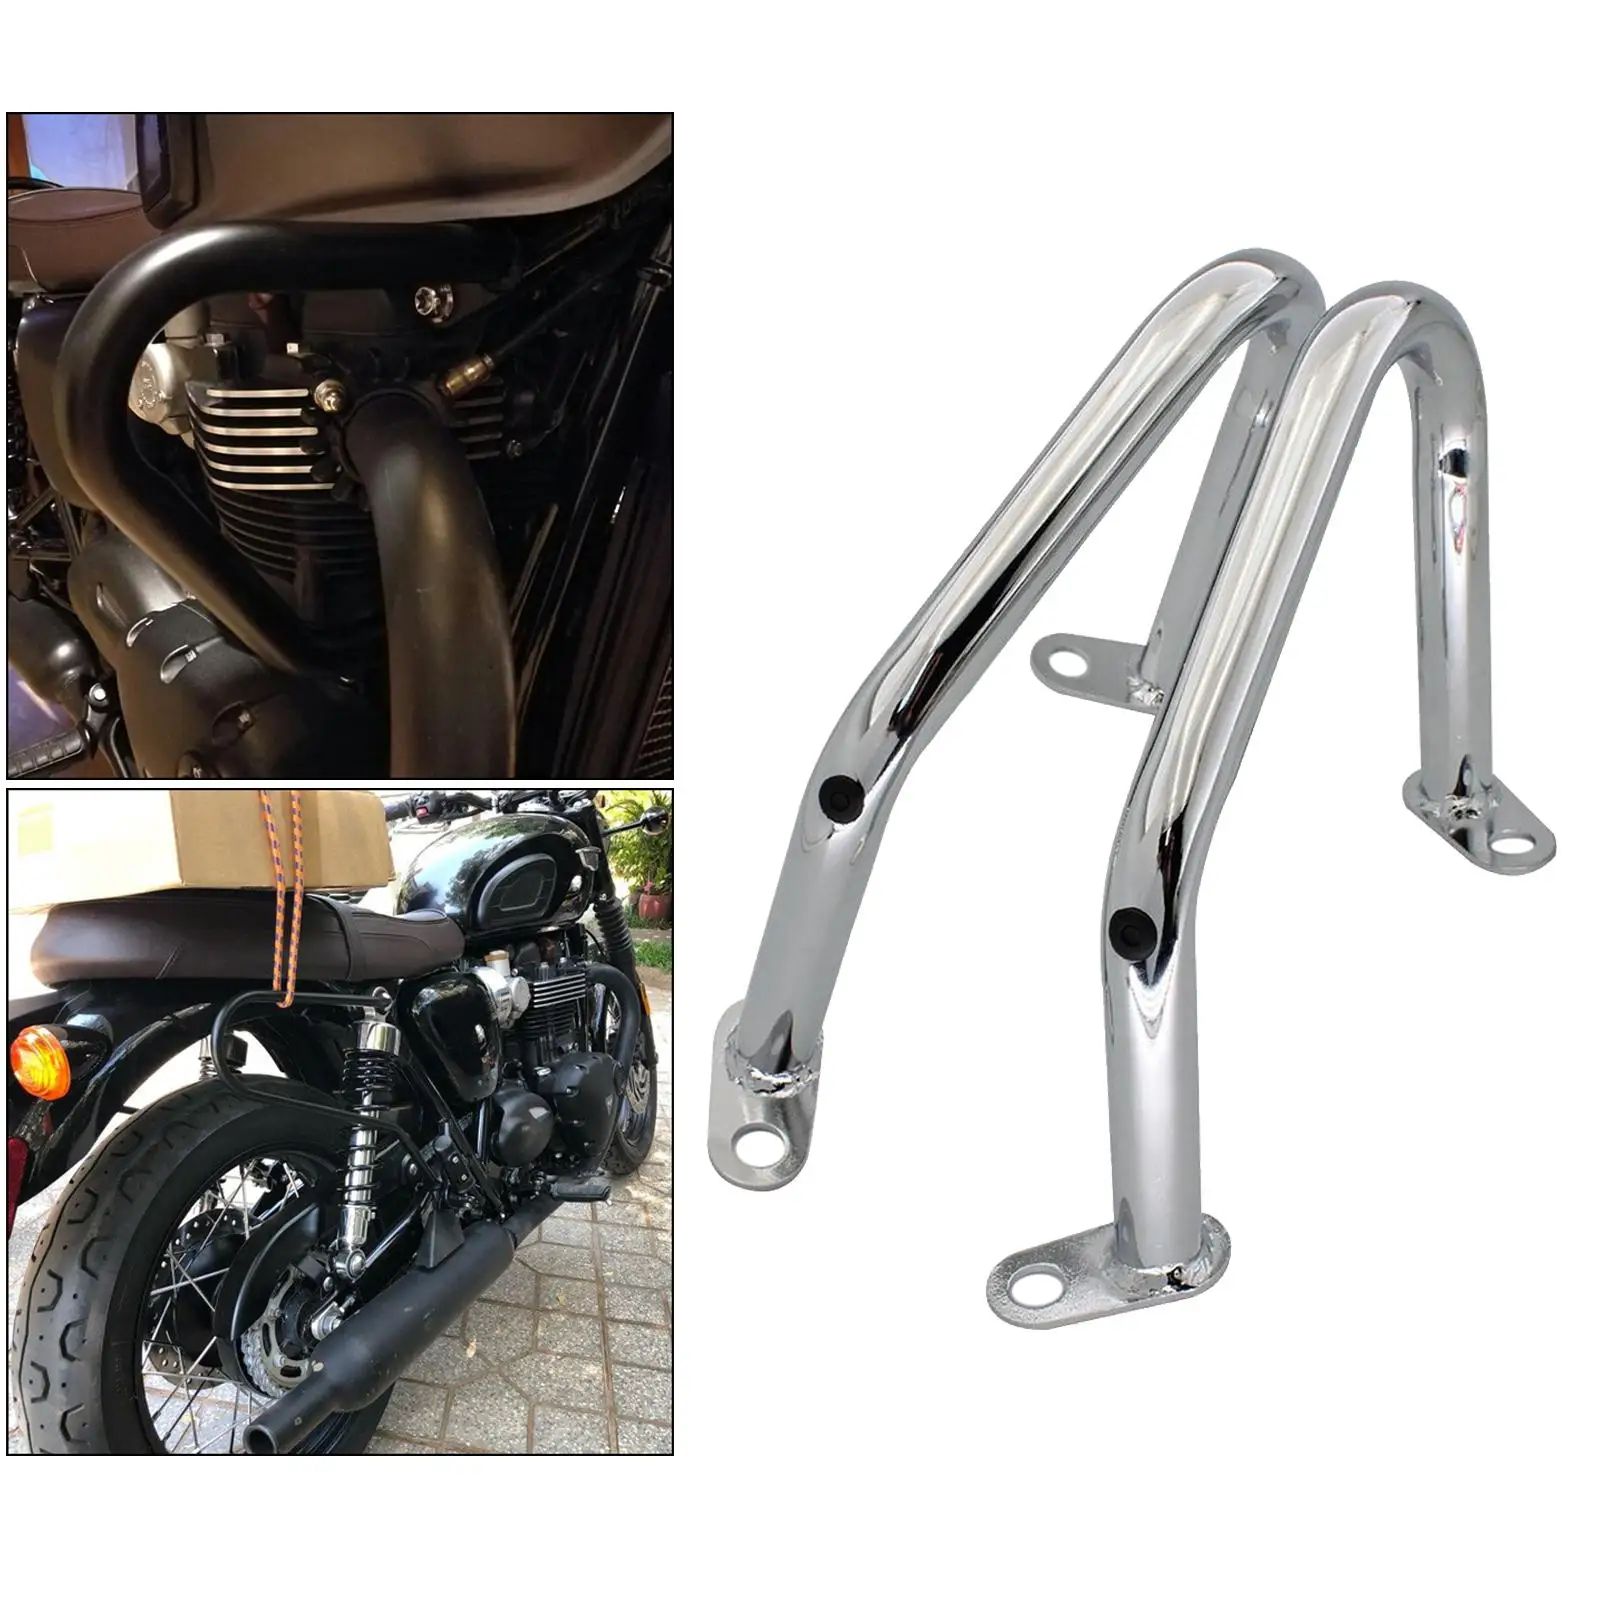 2 Pieces Chrome Motorcycle Engine Protection Crash Bars for  